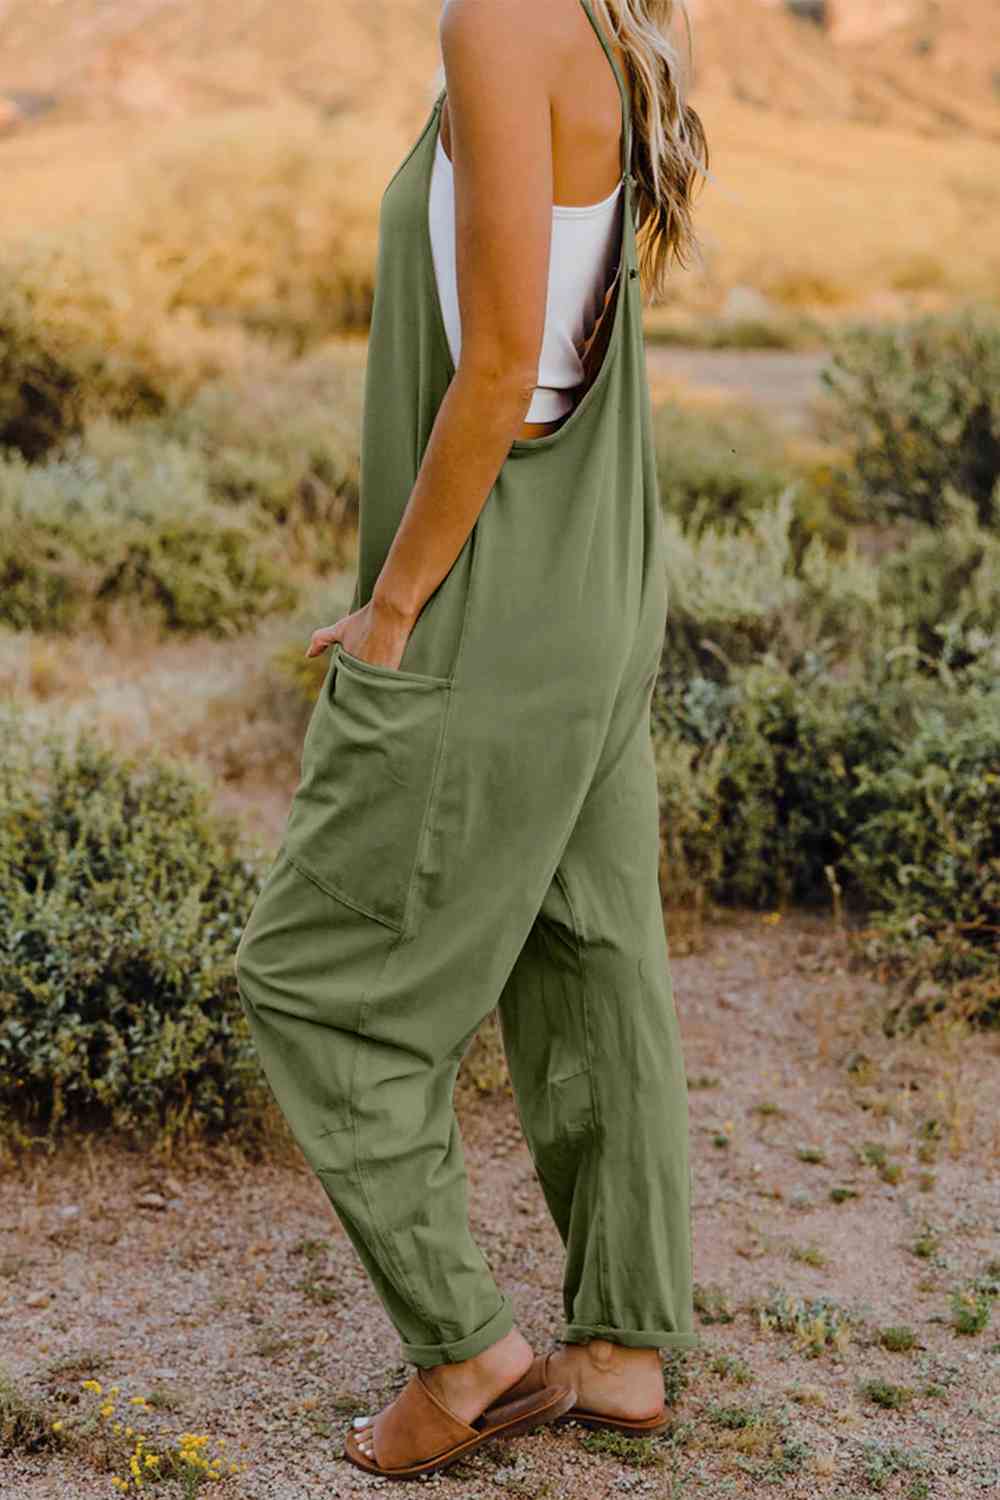 Double Take  V-Neck Sleeveless Jumpsuit with Pocket - Multiple Colors!